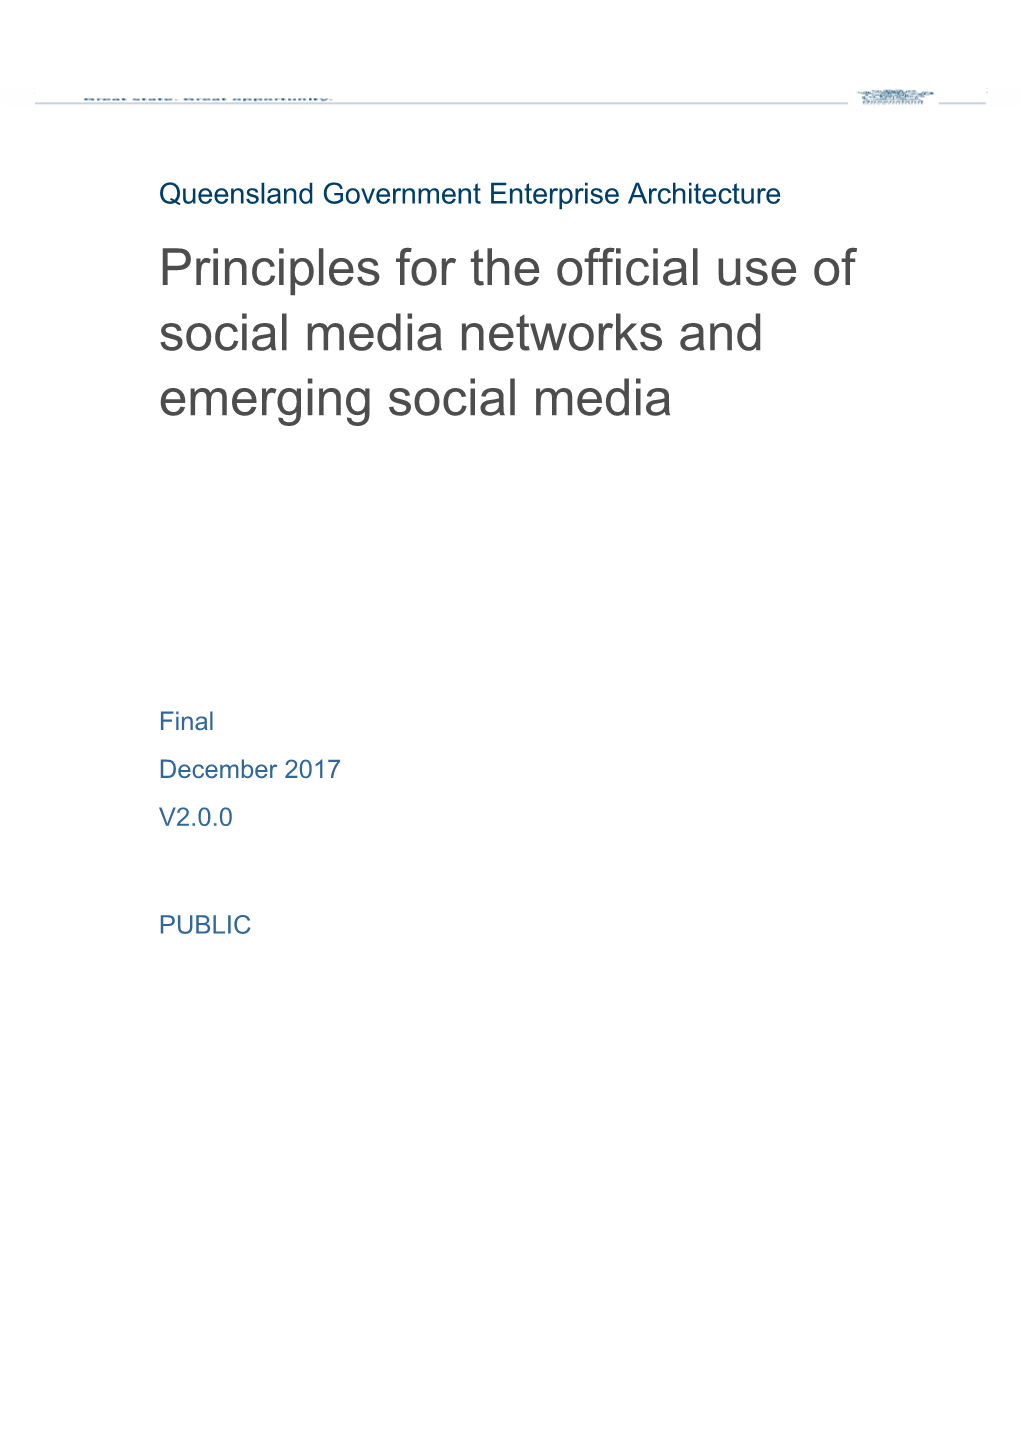 Principles for the Use of Social Media